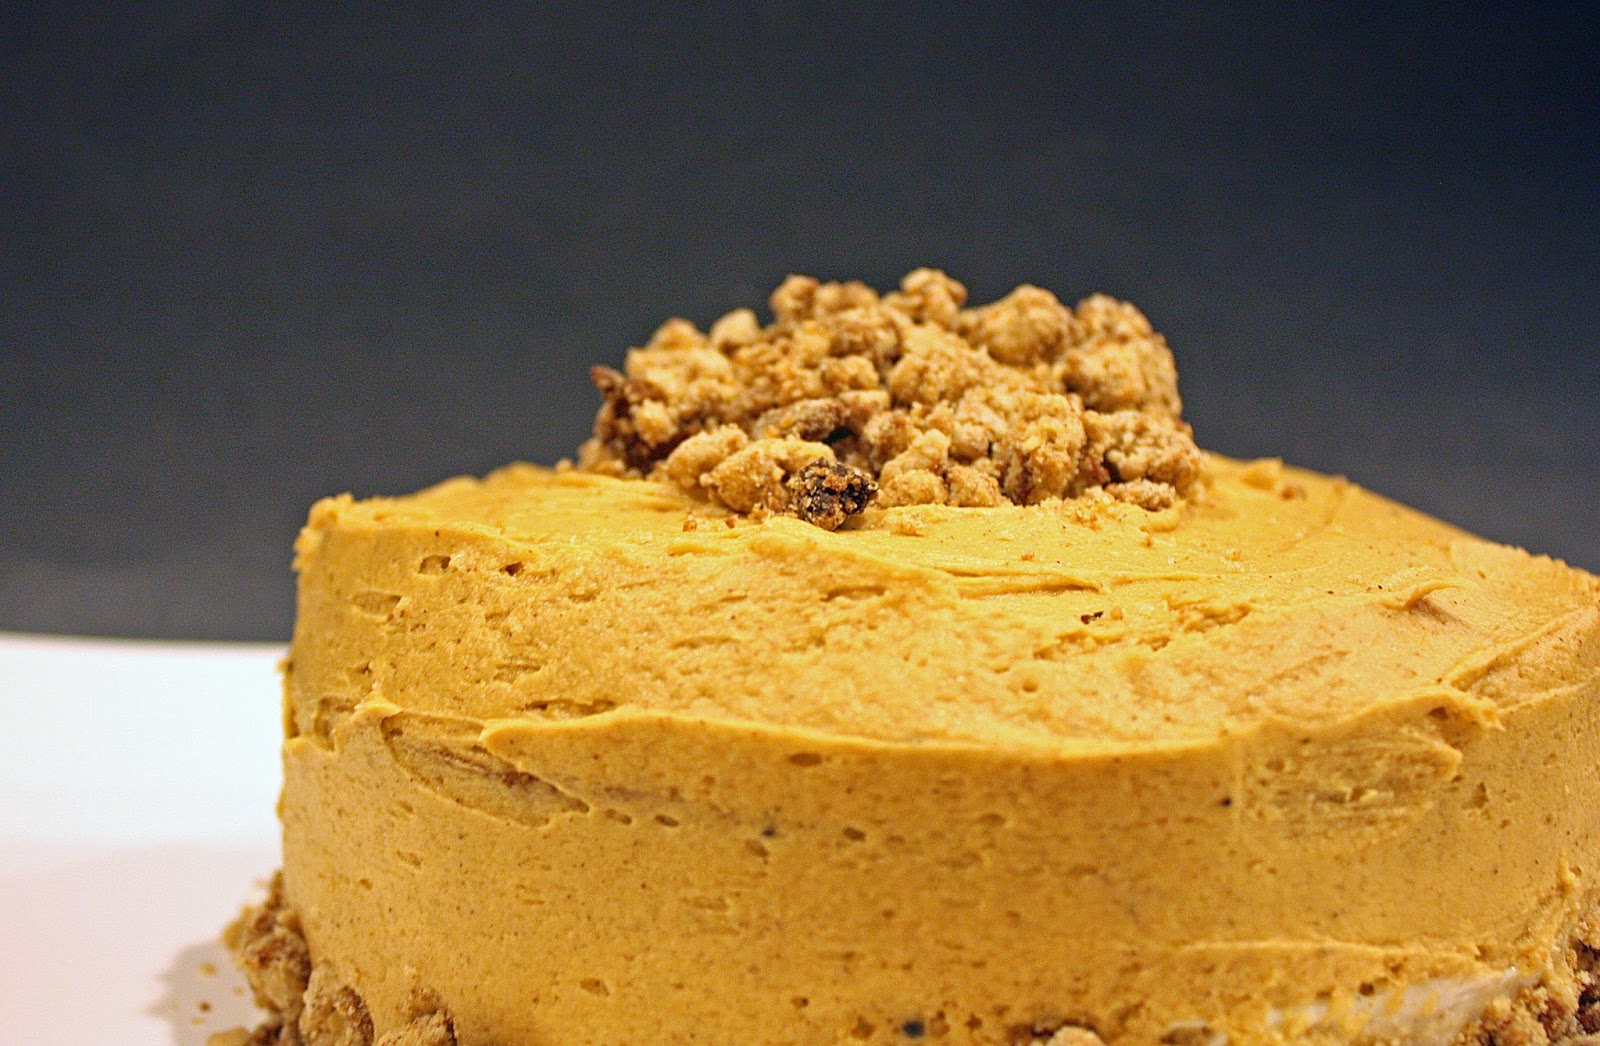 vegan maple gingerbread layer cake with cheesecake filling and spiced crumbs